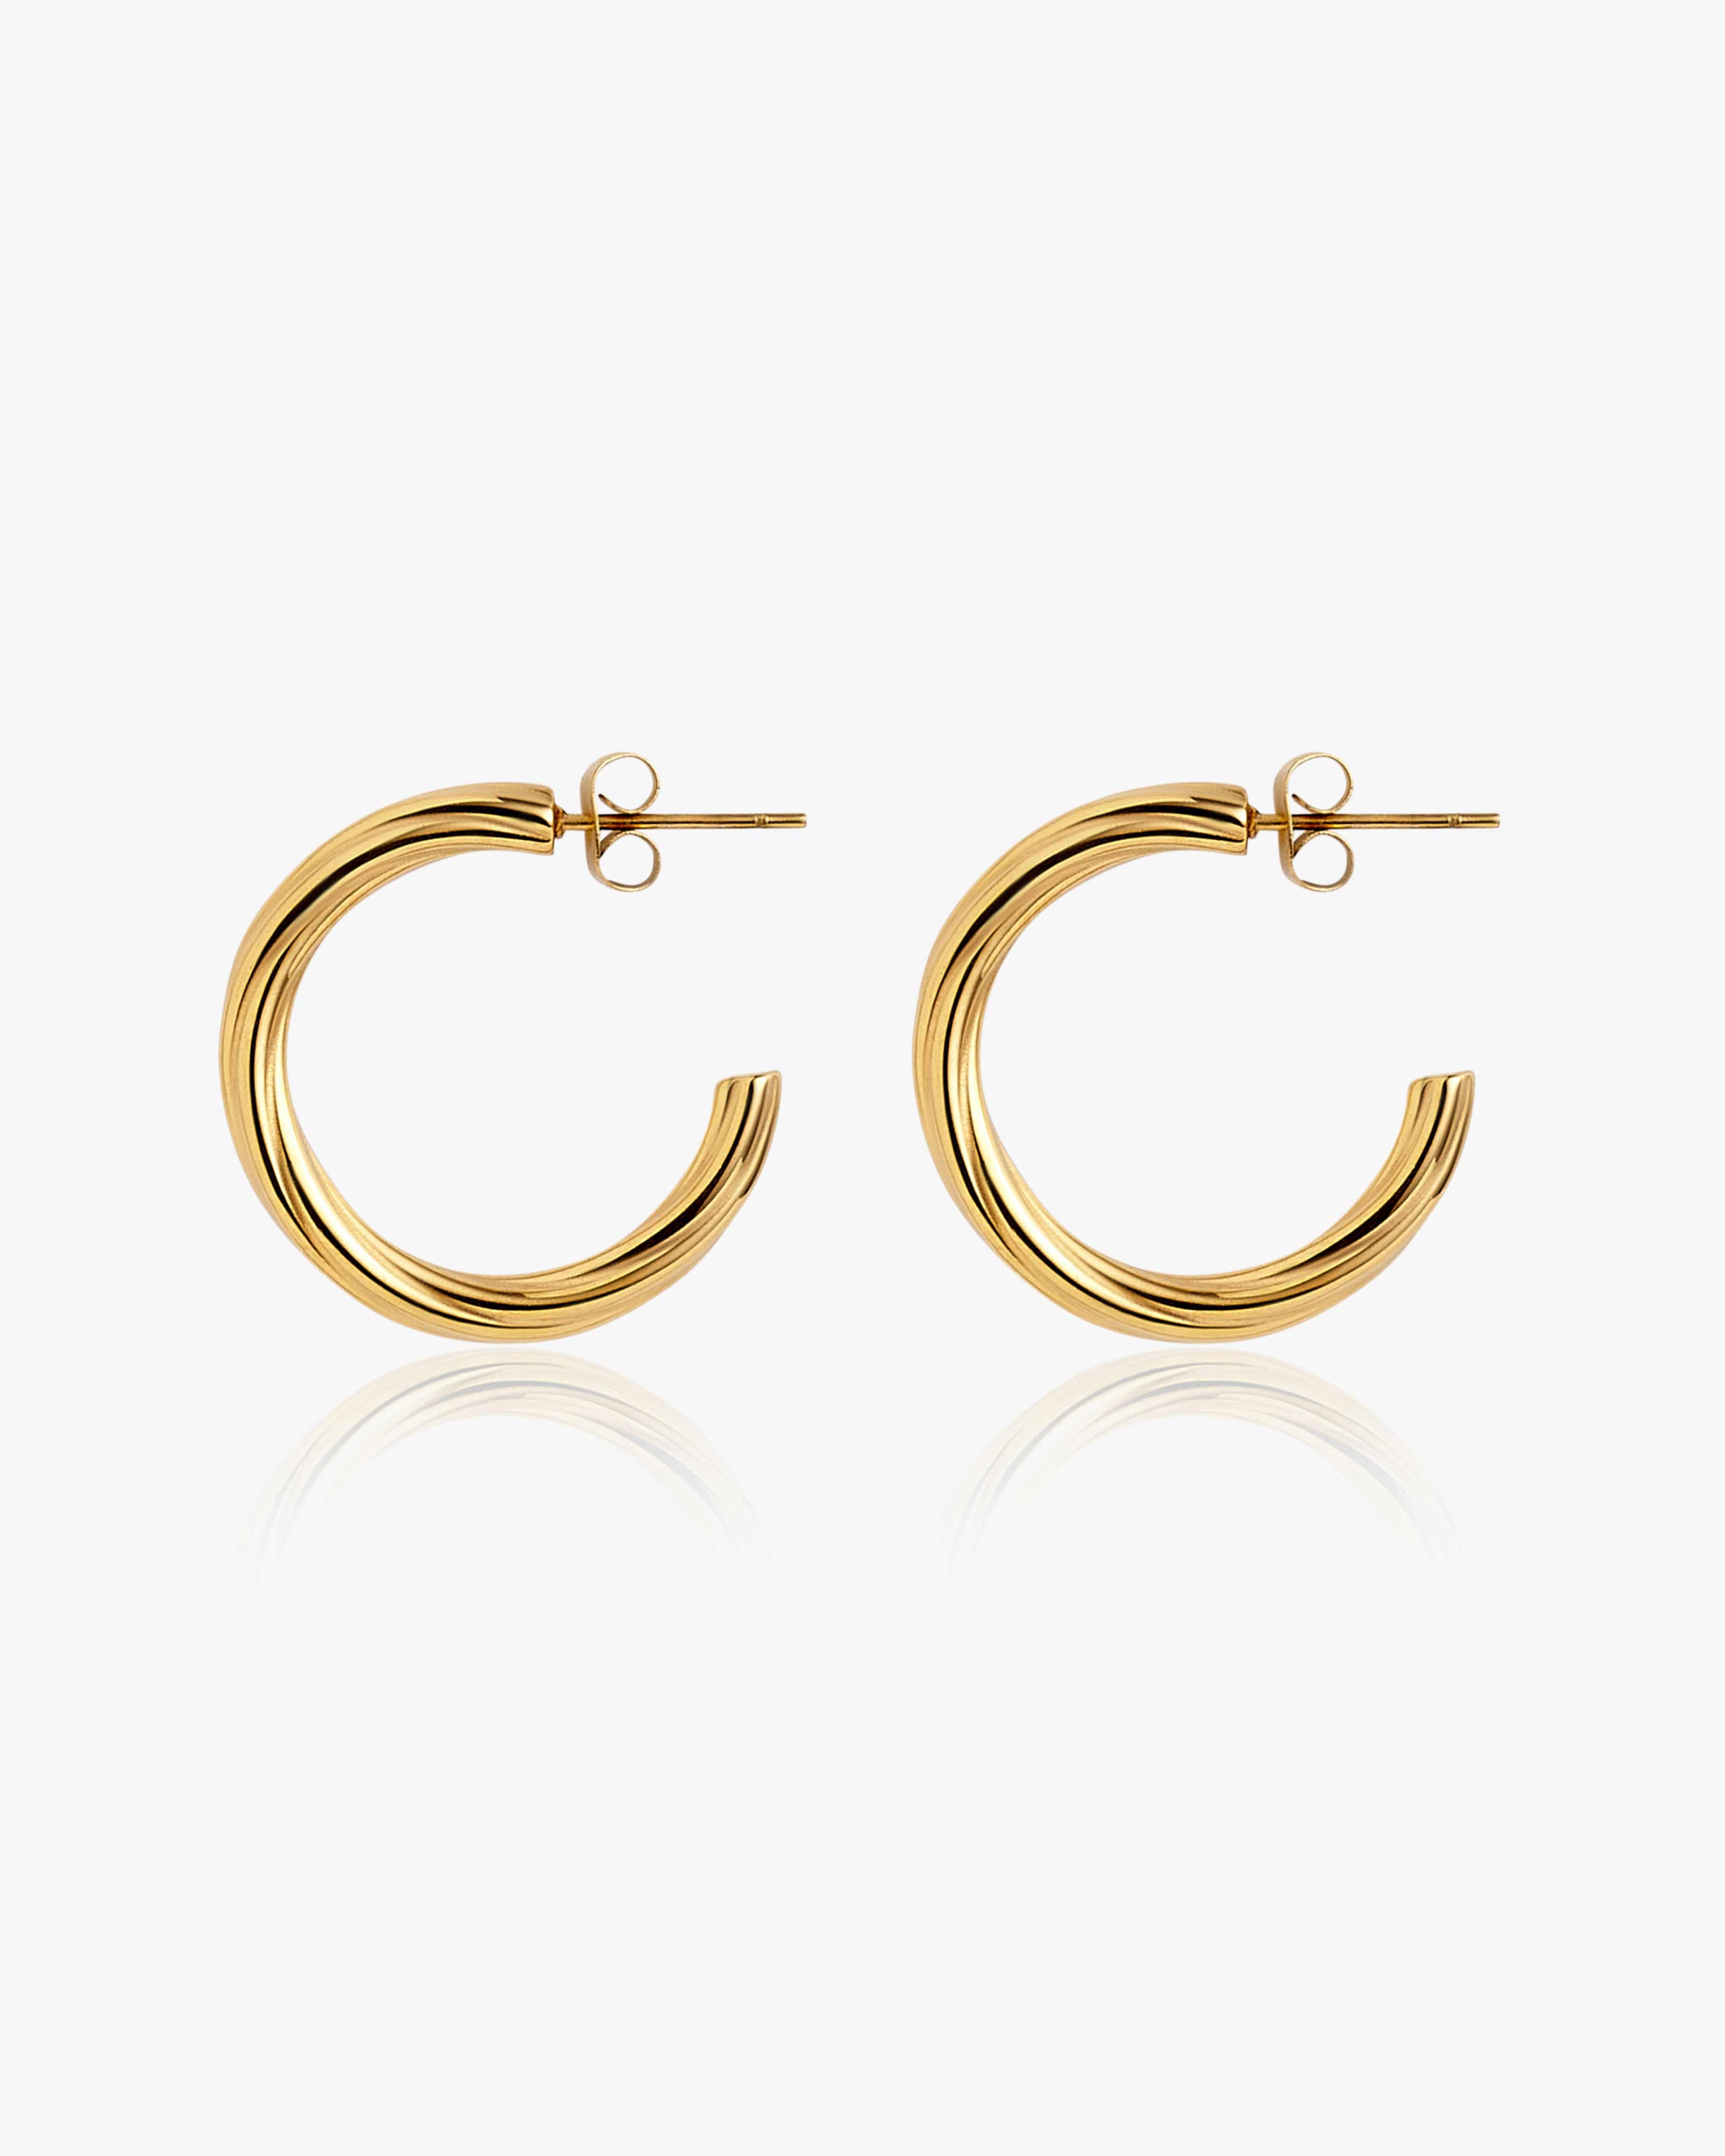 Gold Twisted C Shaped Earrings